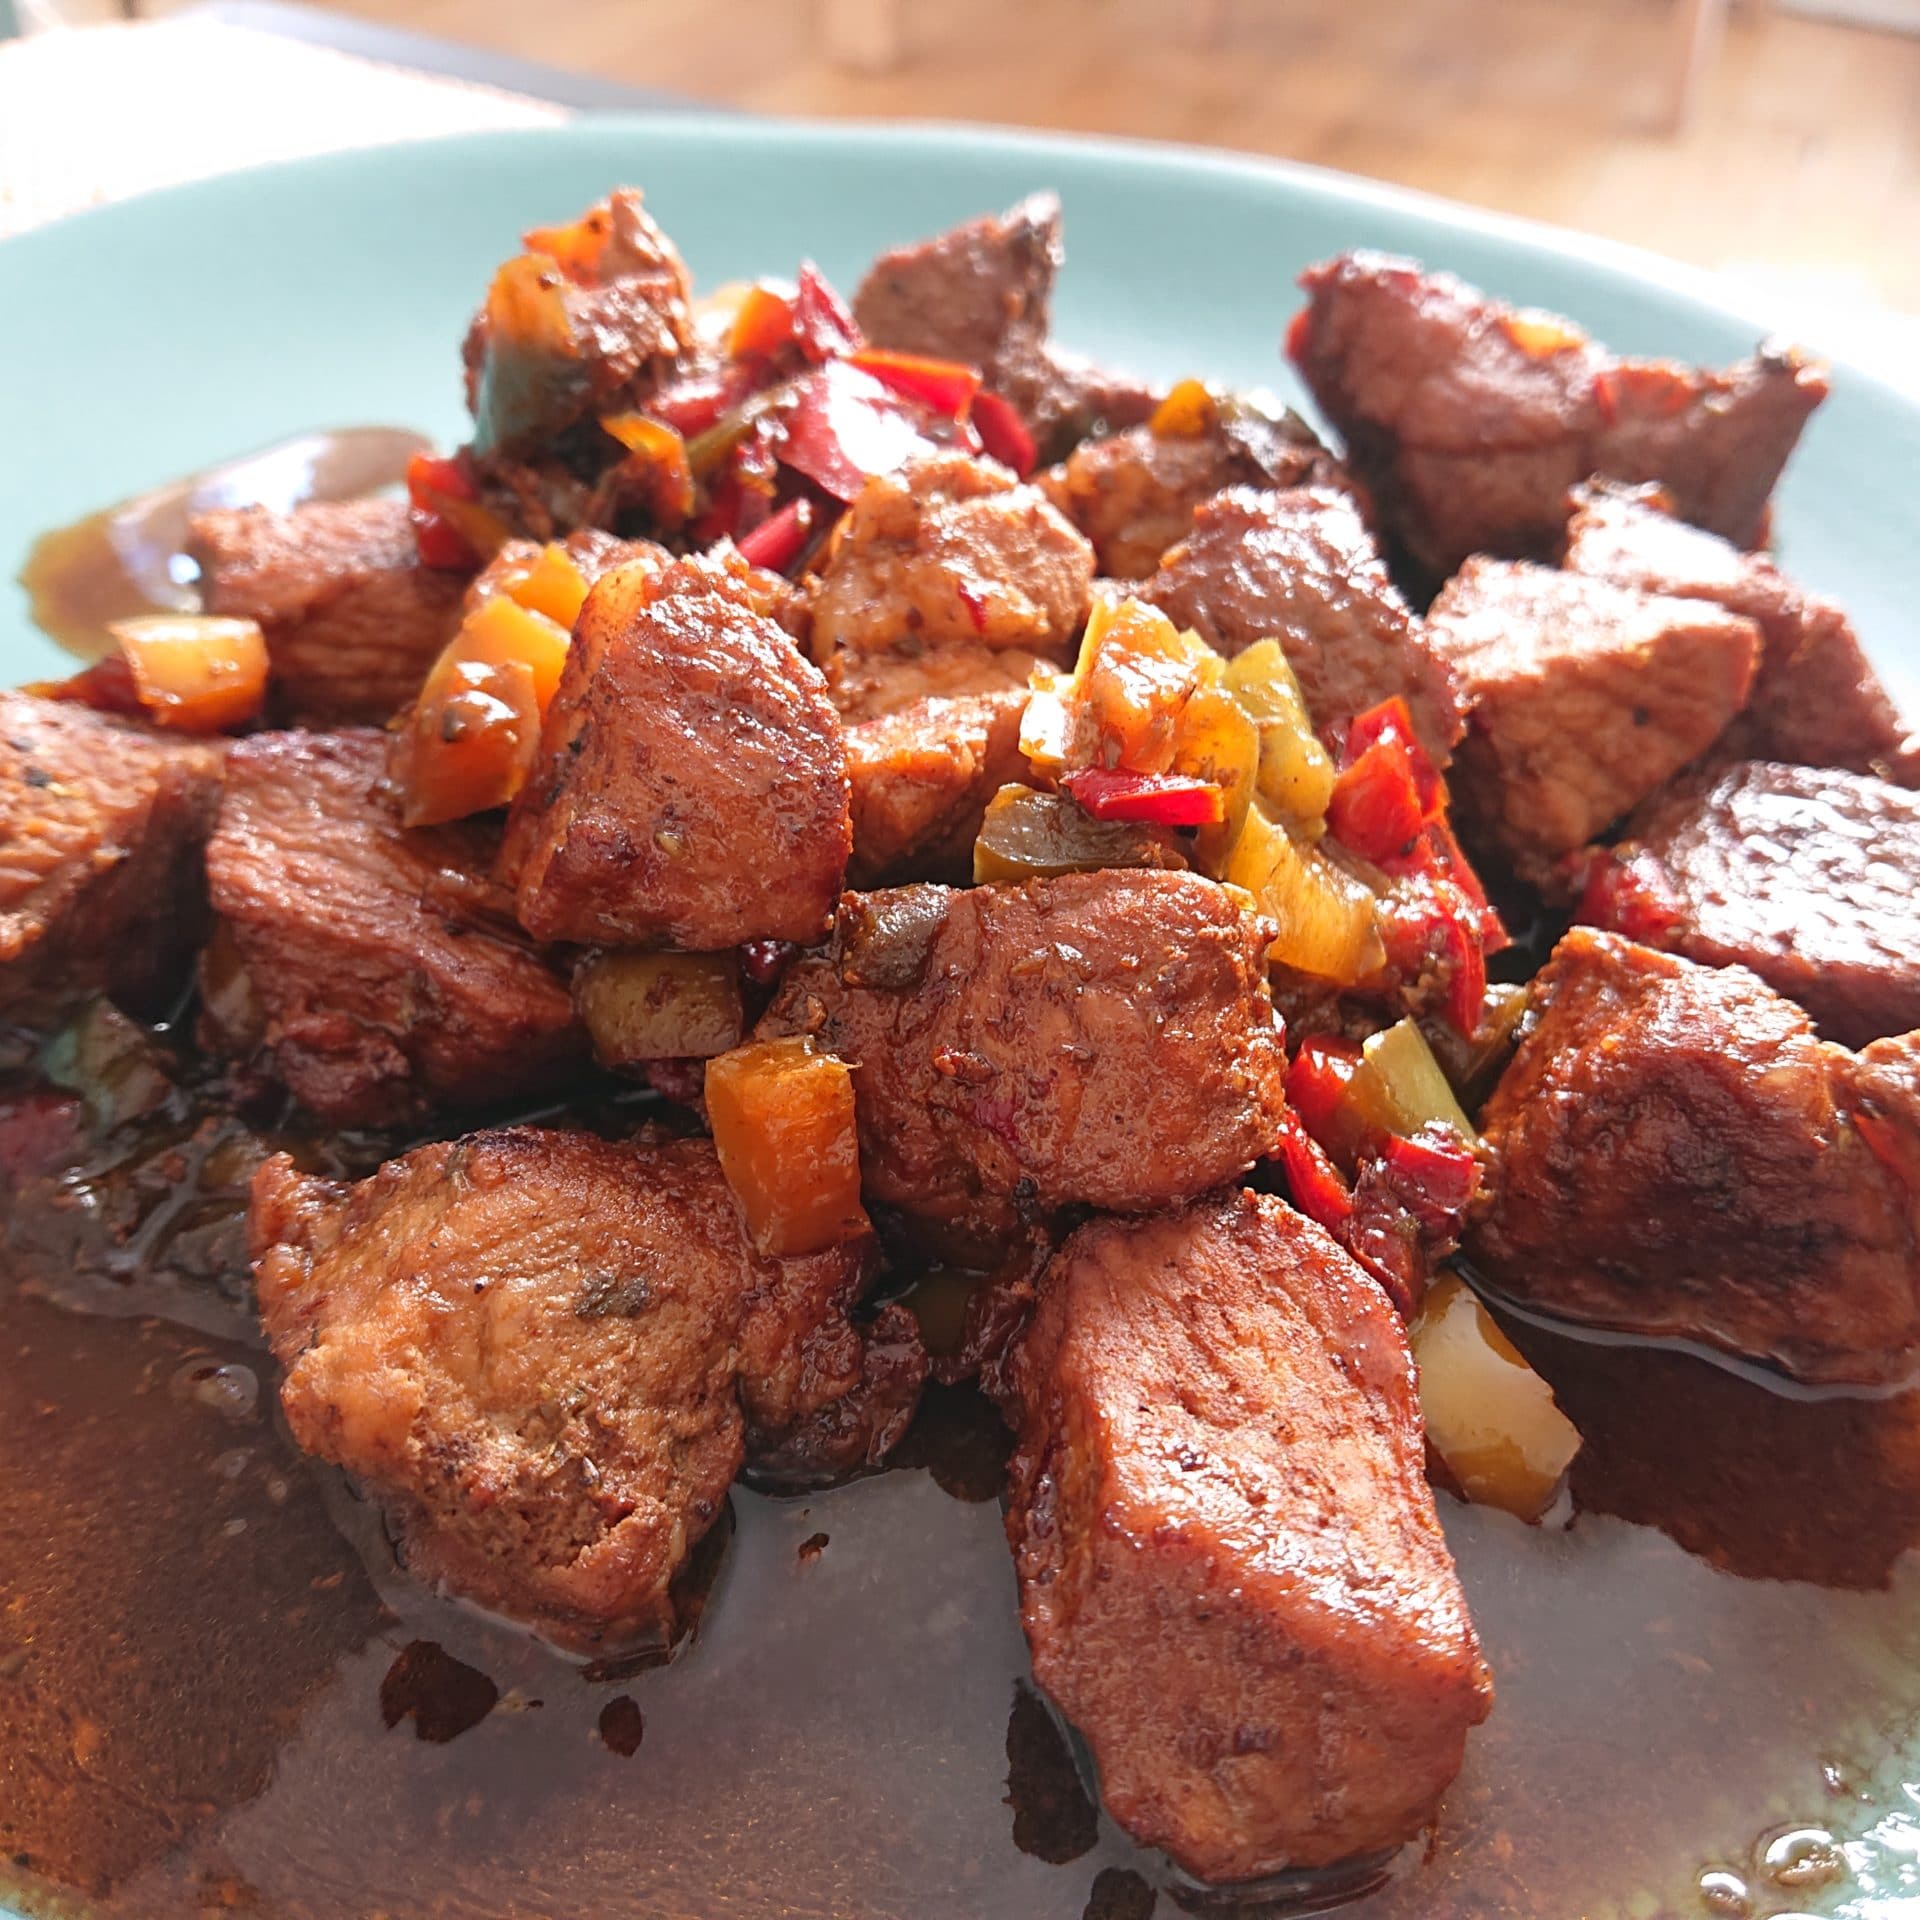 Tigania (pork with peppers in the pan)